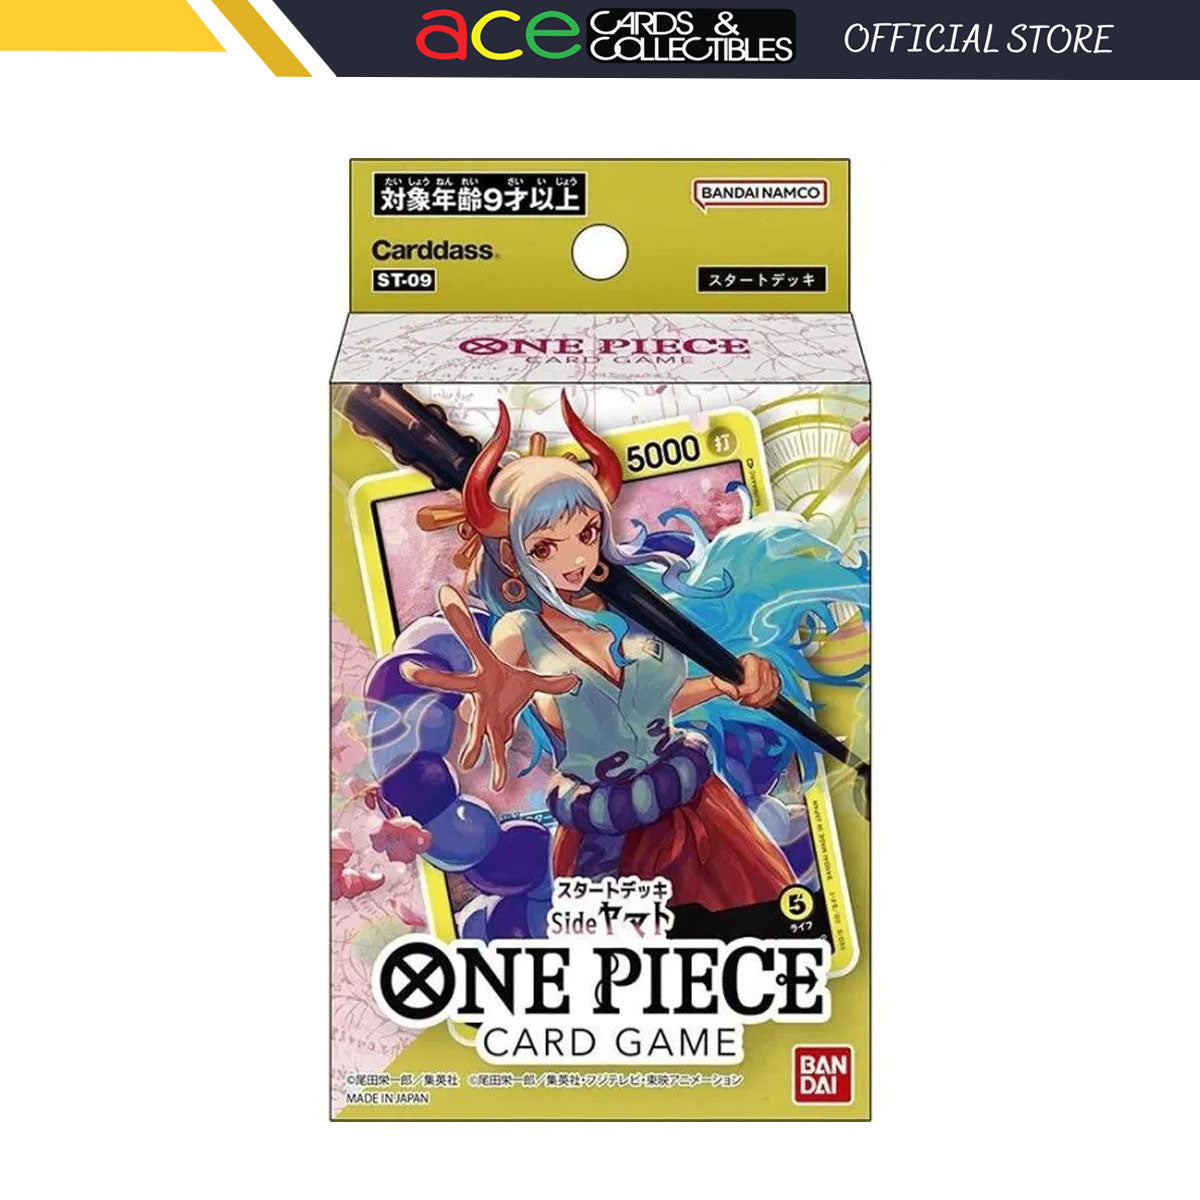 One Piece Card Game Yamato Deck Side (ST-09) (Japanese)-Bandai-Ace Cards & Collectibles